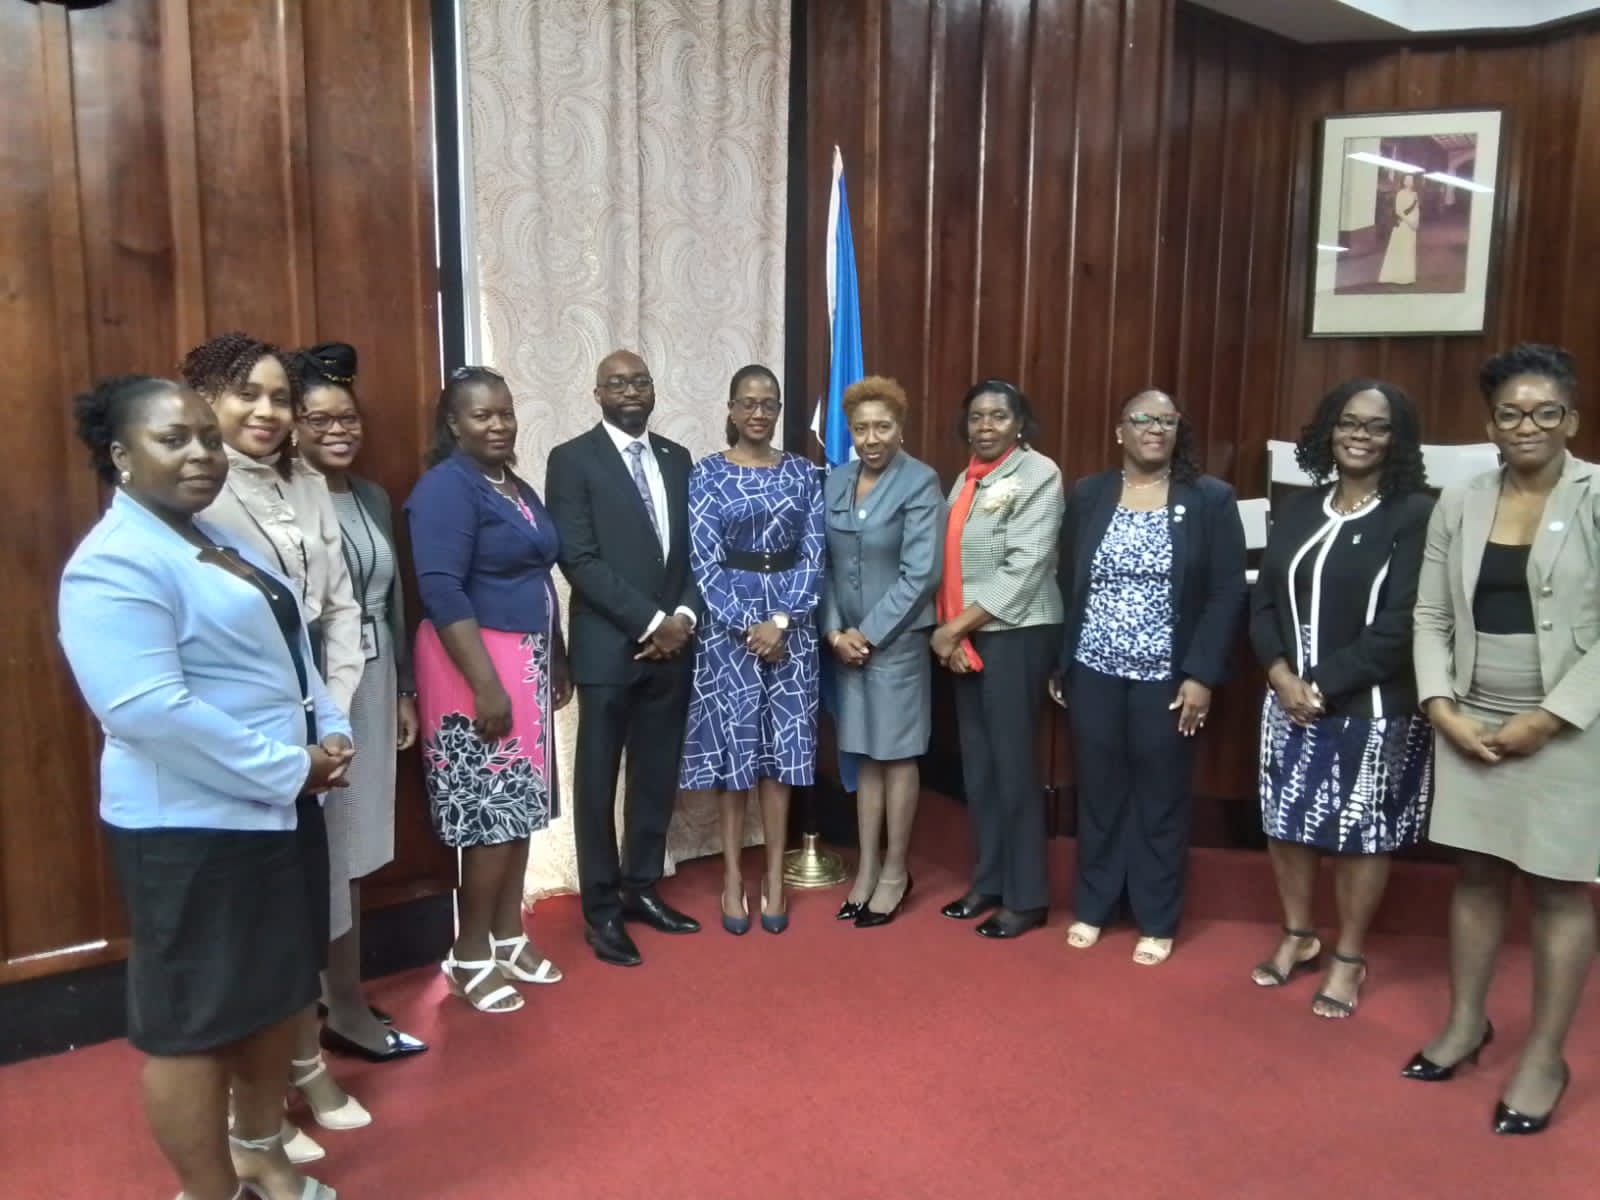 Participating Senators, Members and officials from the Parliament of Saint Lucia